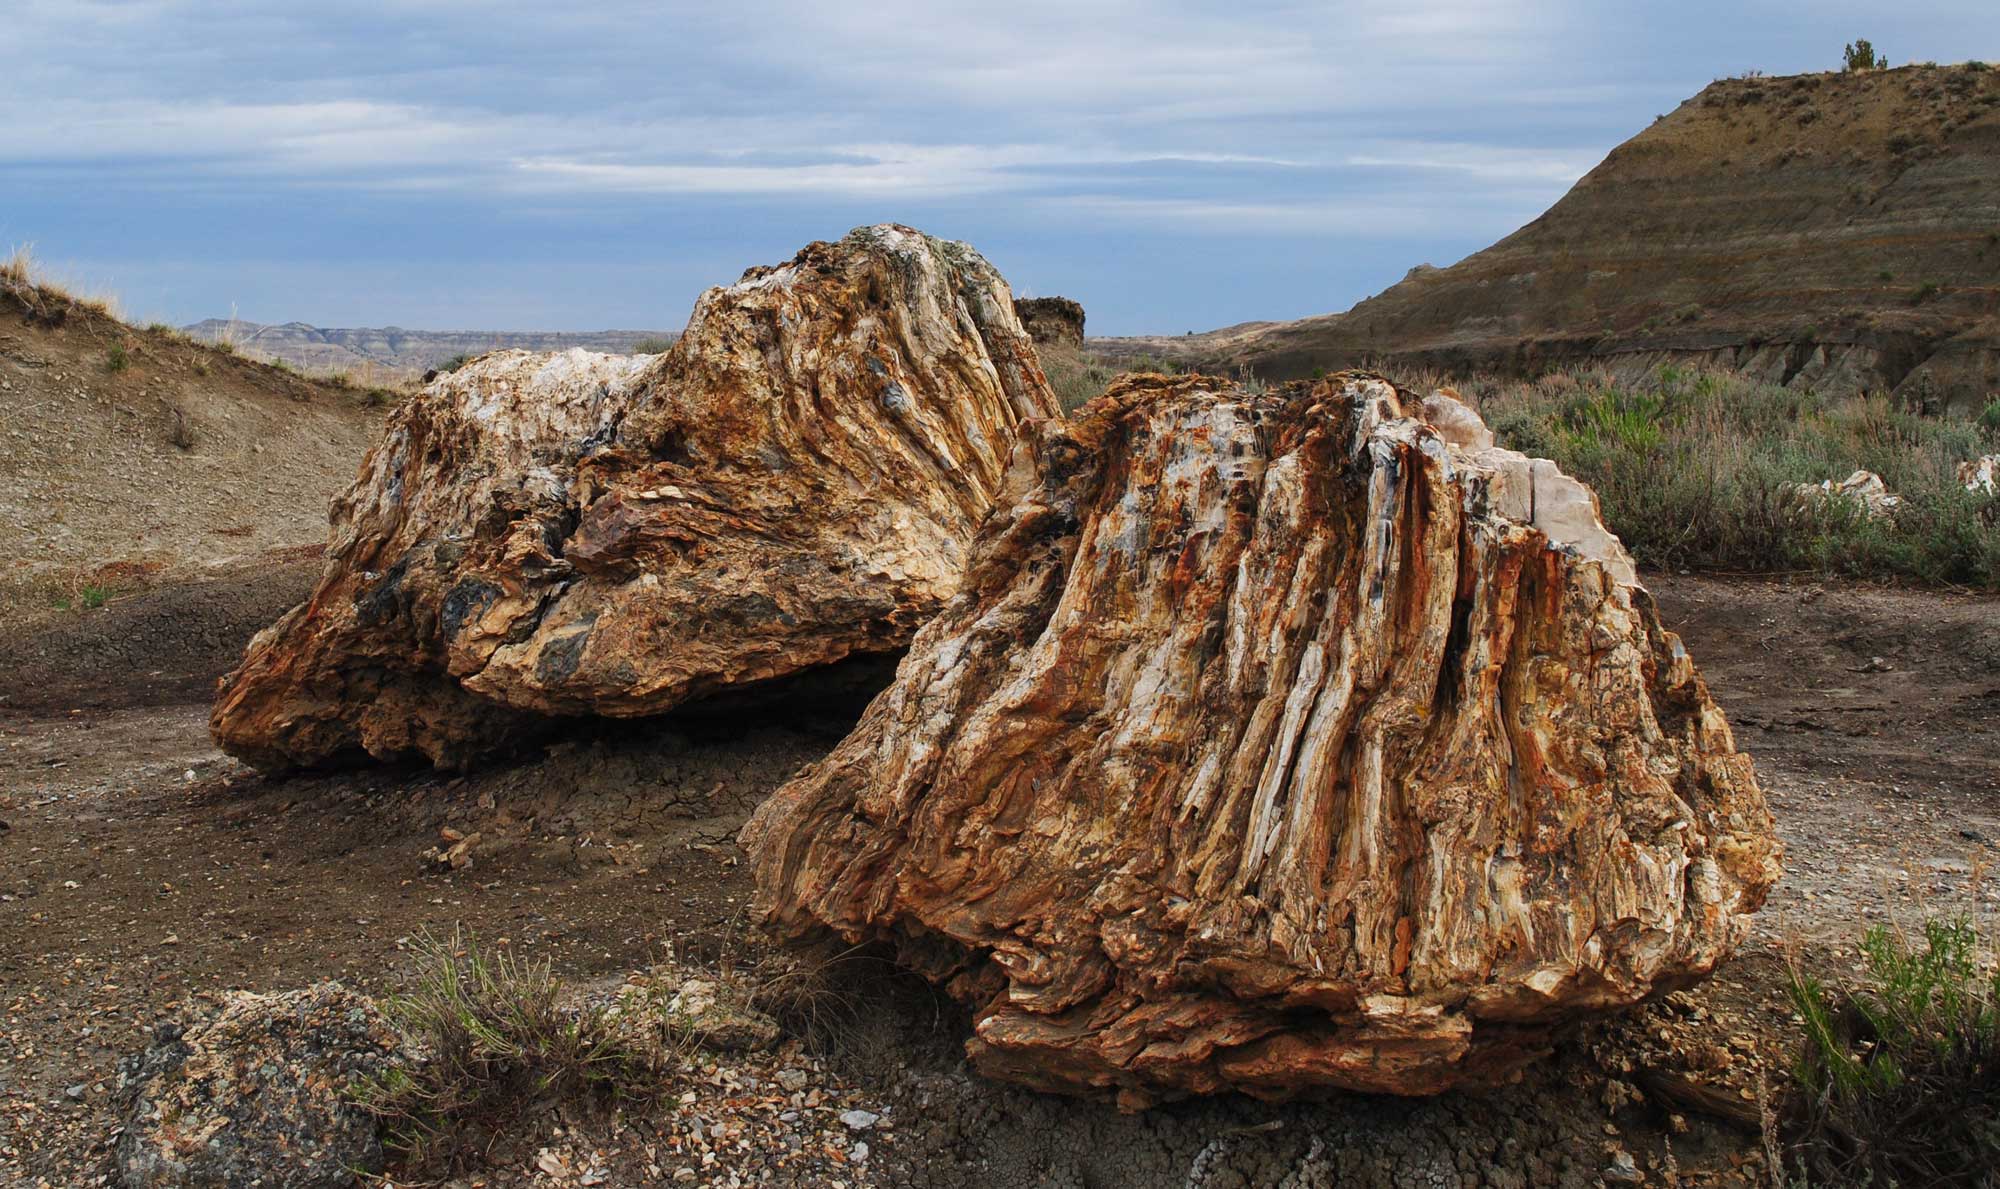 Photograph of two petrified wood stumps sitting on a flat area with sparse vegetation in Theodore Roosevelt National Park, North Dakota. A butte rises in to the back right, and the sky is overcast.